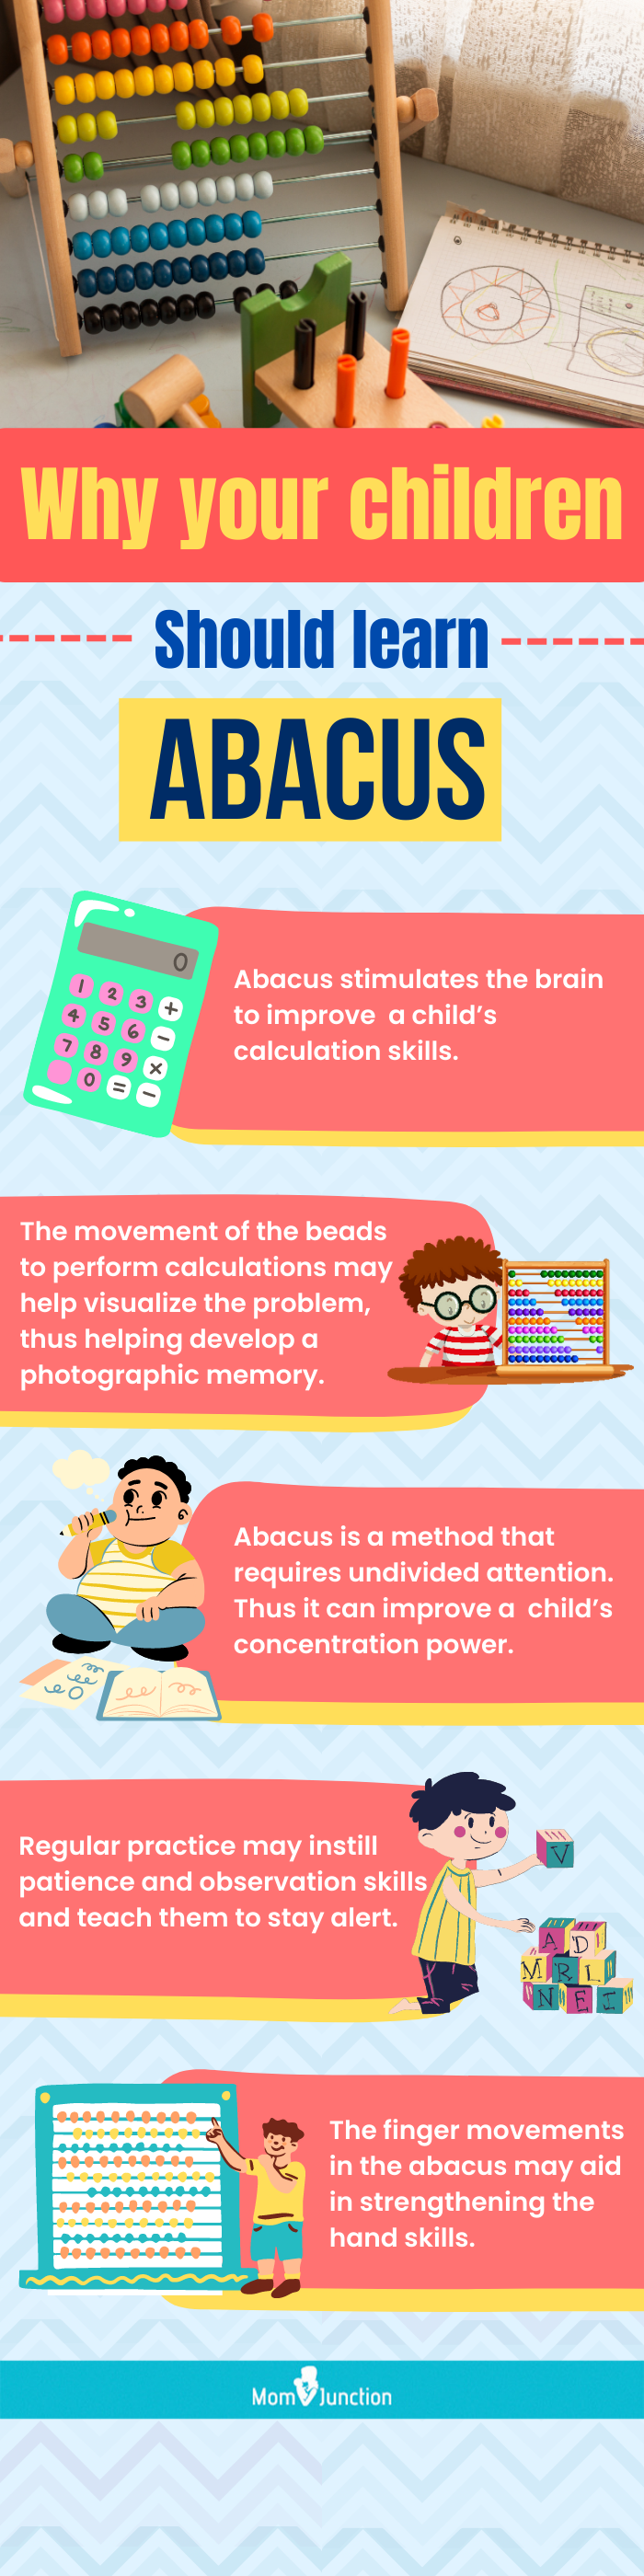 benefits of teaching the abacus method to children (infographic)